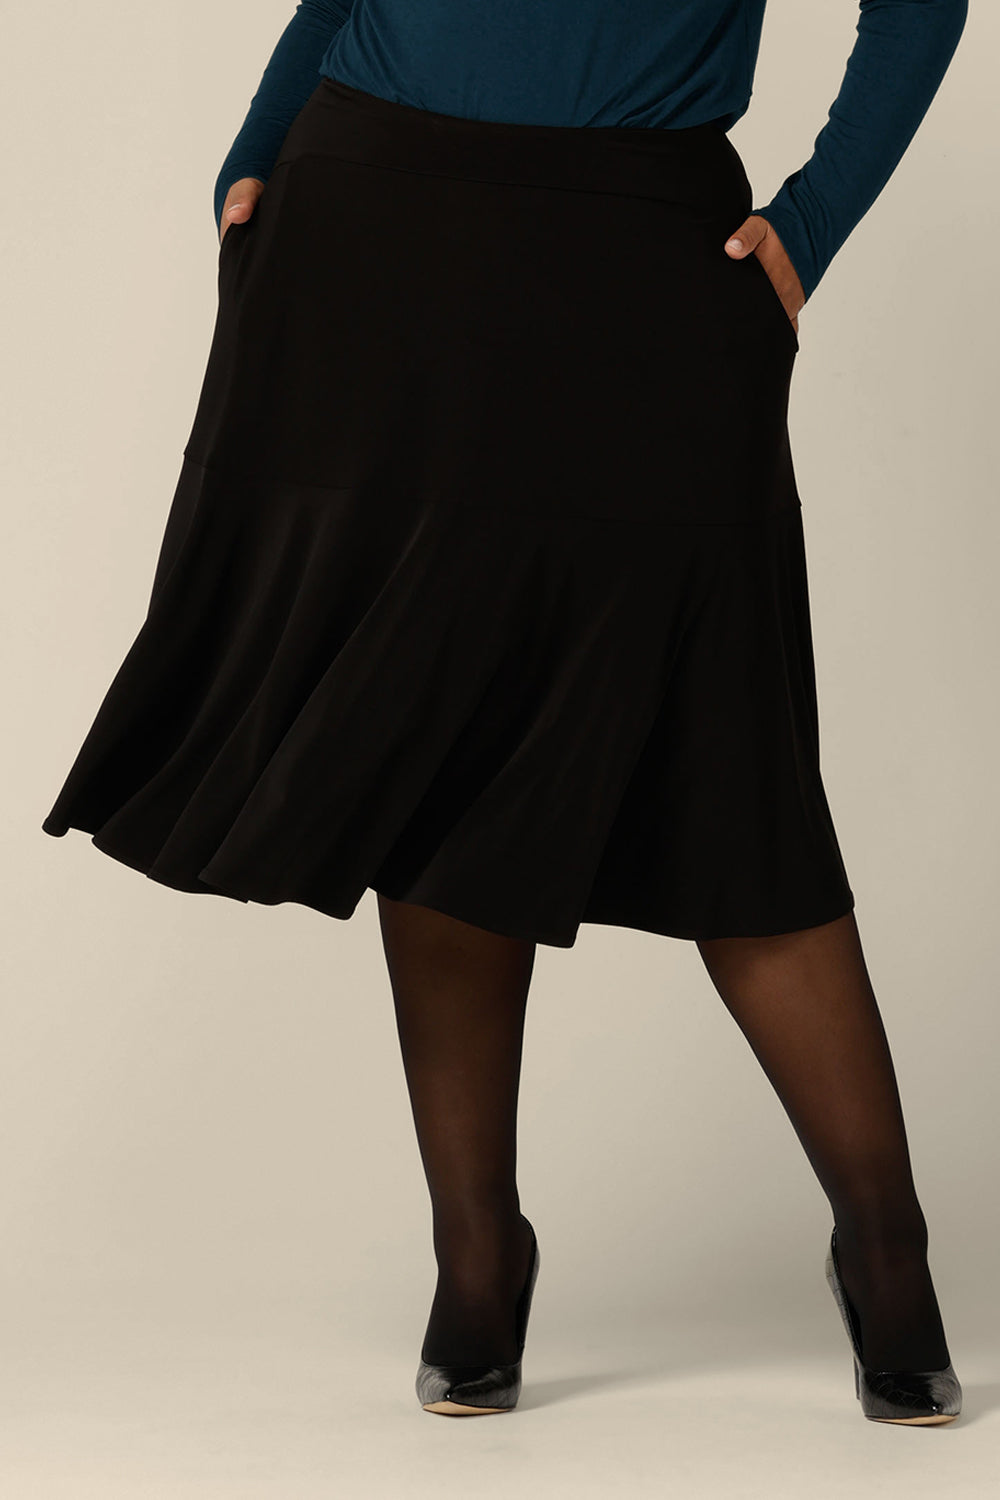 A fuller figure woman wears a pull on, black skirt with knee-length ruffle hemline and side pockets. This black skirt is a comfortable skirt for workwear or smart-casual wear.